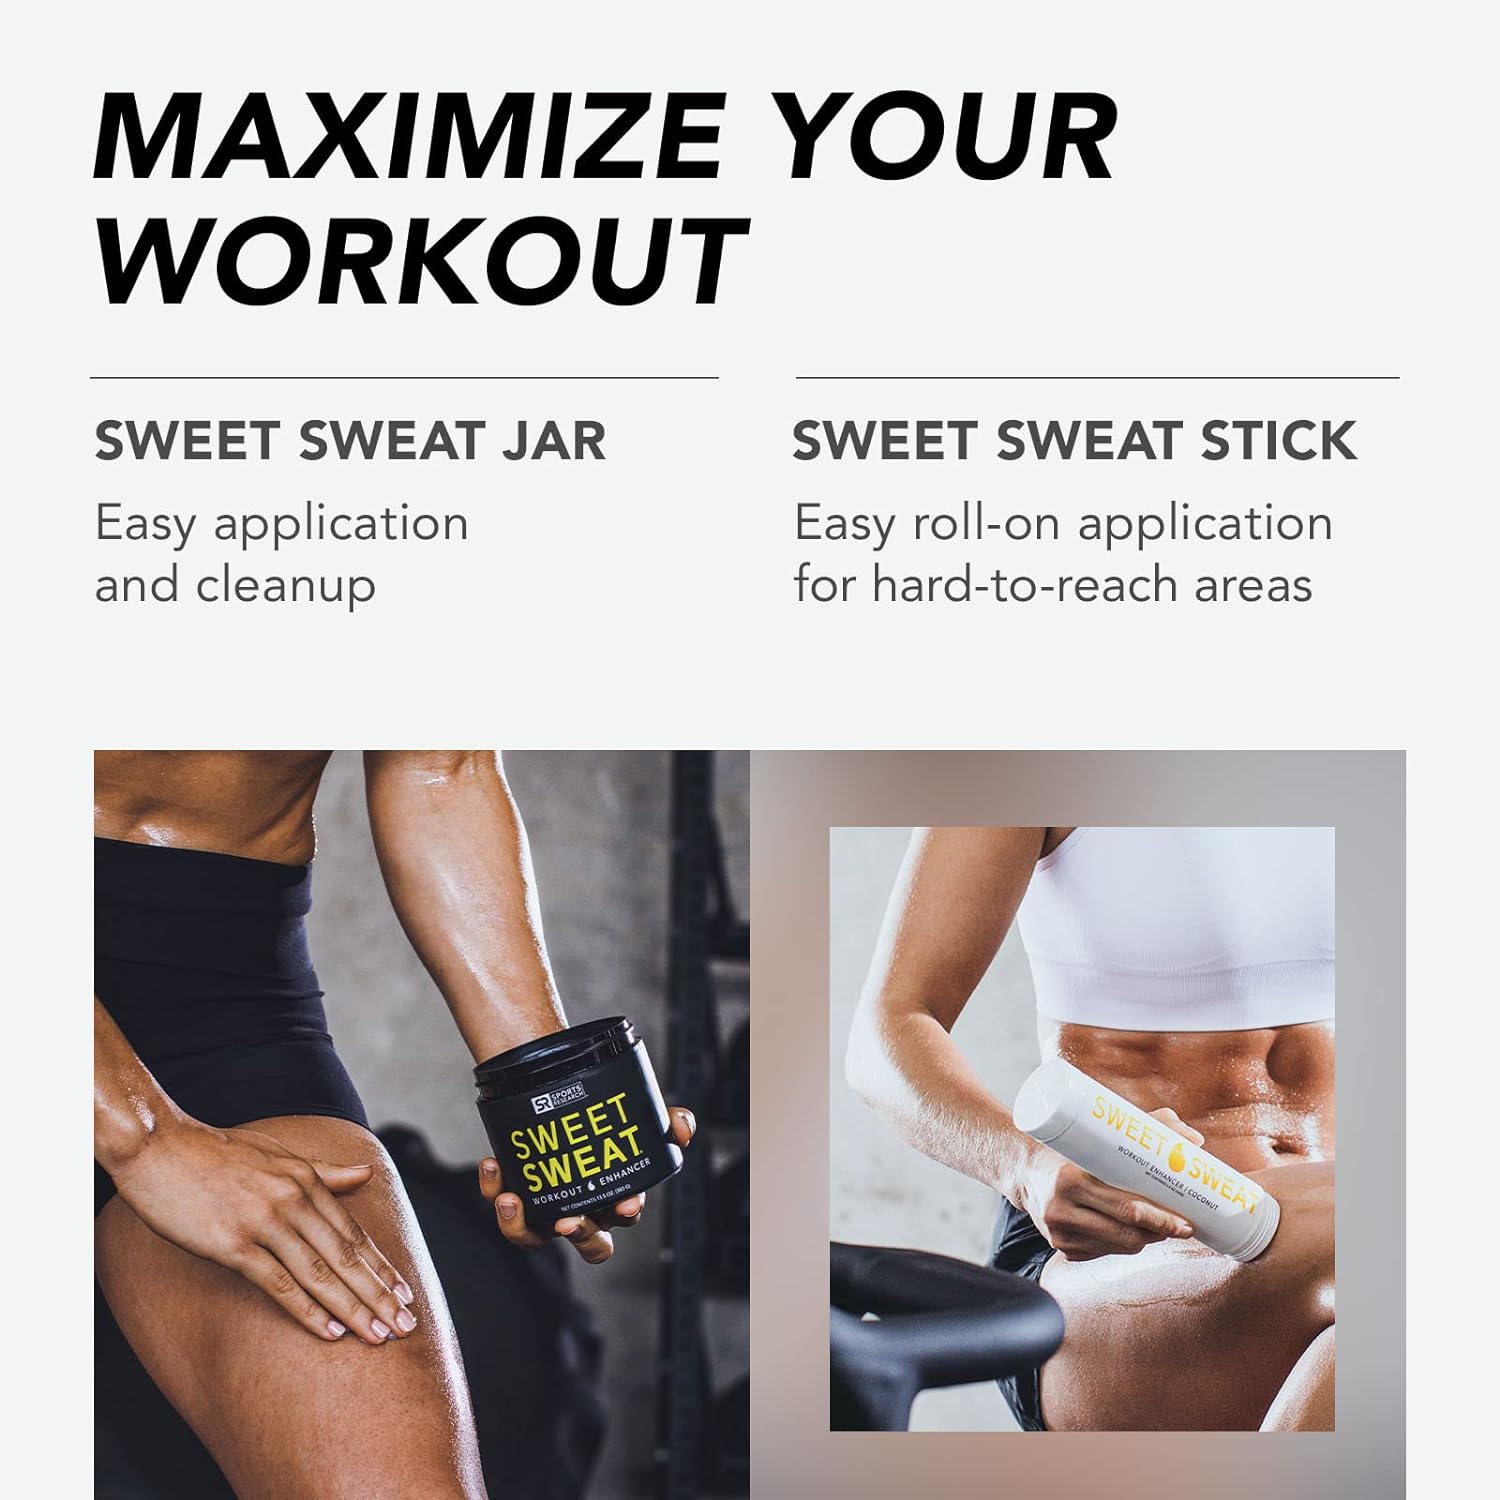 Sweet Sweat 'Workout Enhancer' Gel - Maximize Your Exercise & Sweat Faster - 13.5oz Jar (Tropical Scent)